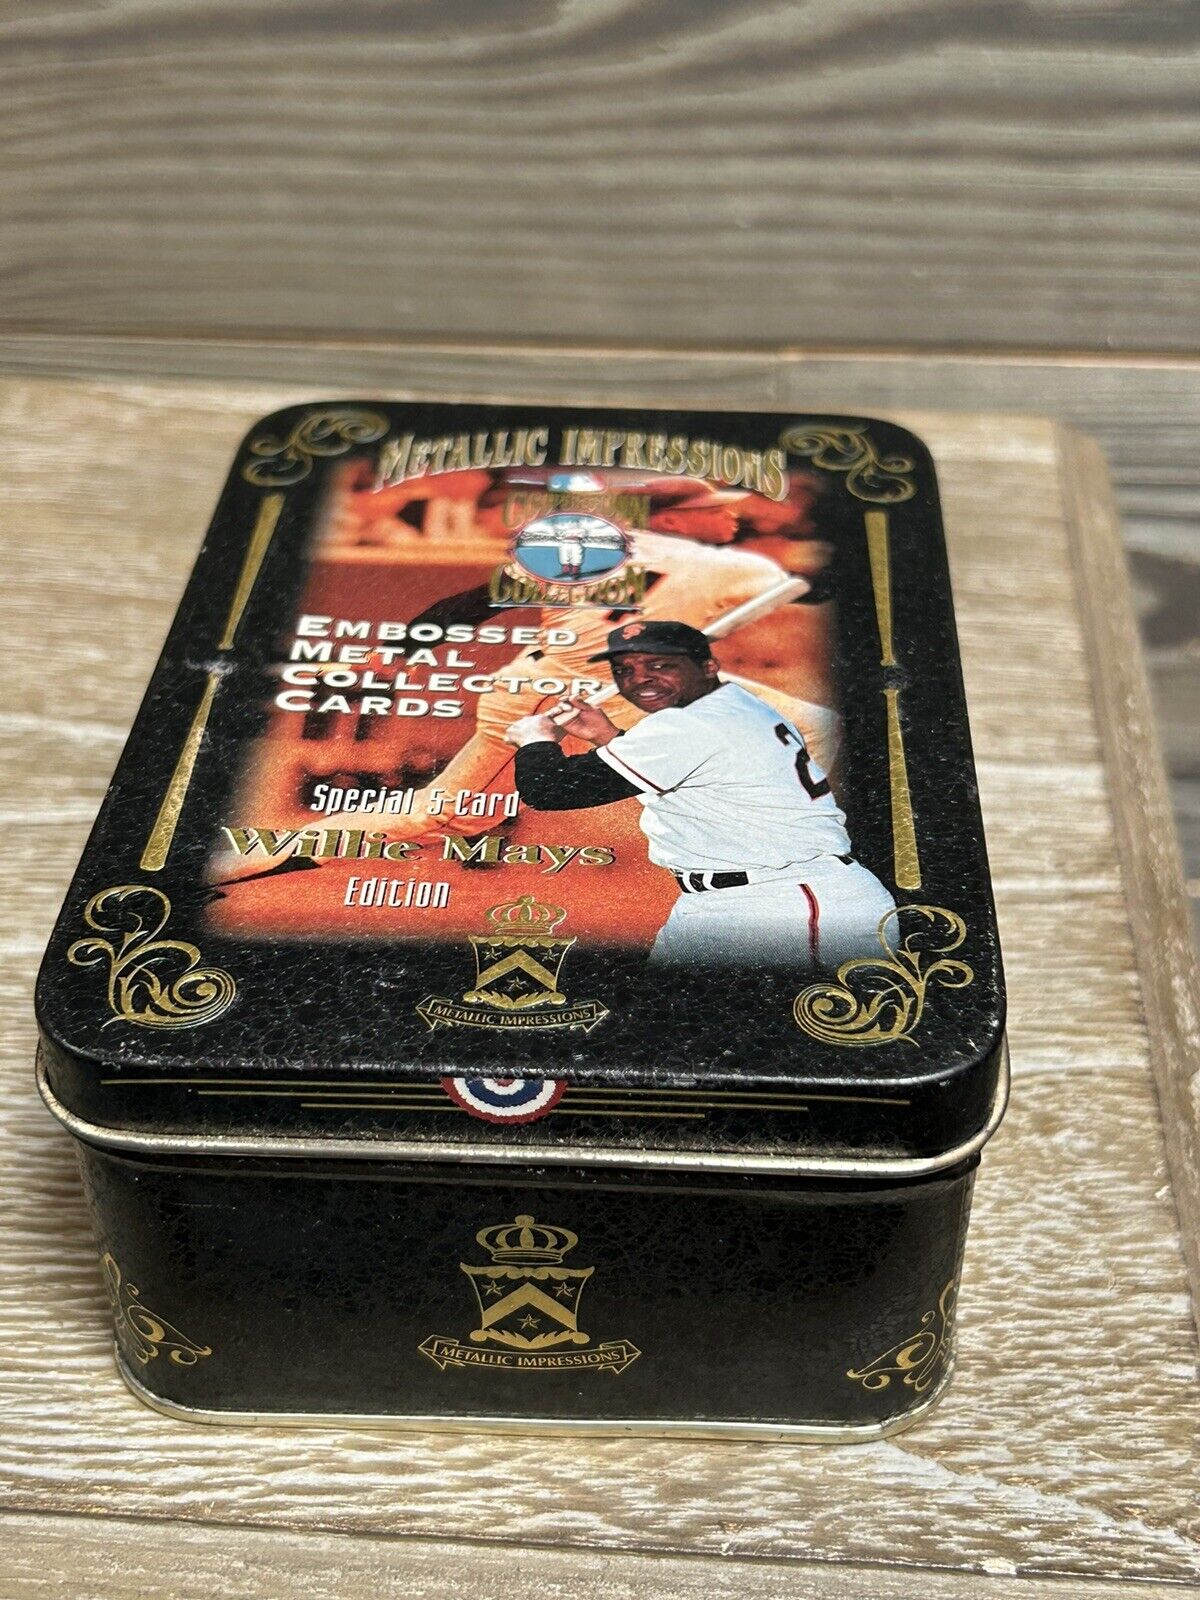 Willie Mays Metallic Impresions Tin Box Only, NO CARDS Cooperstown Collection